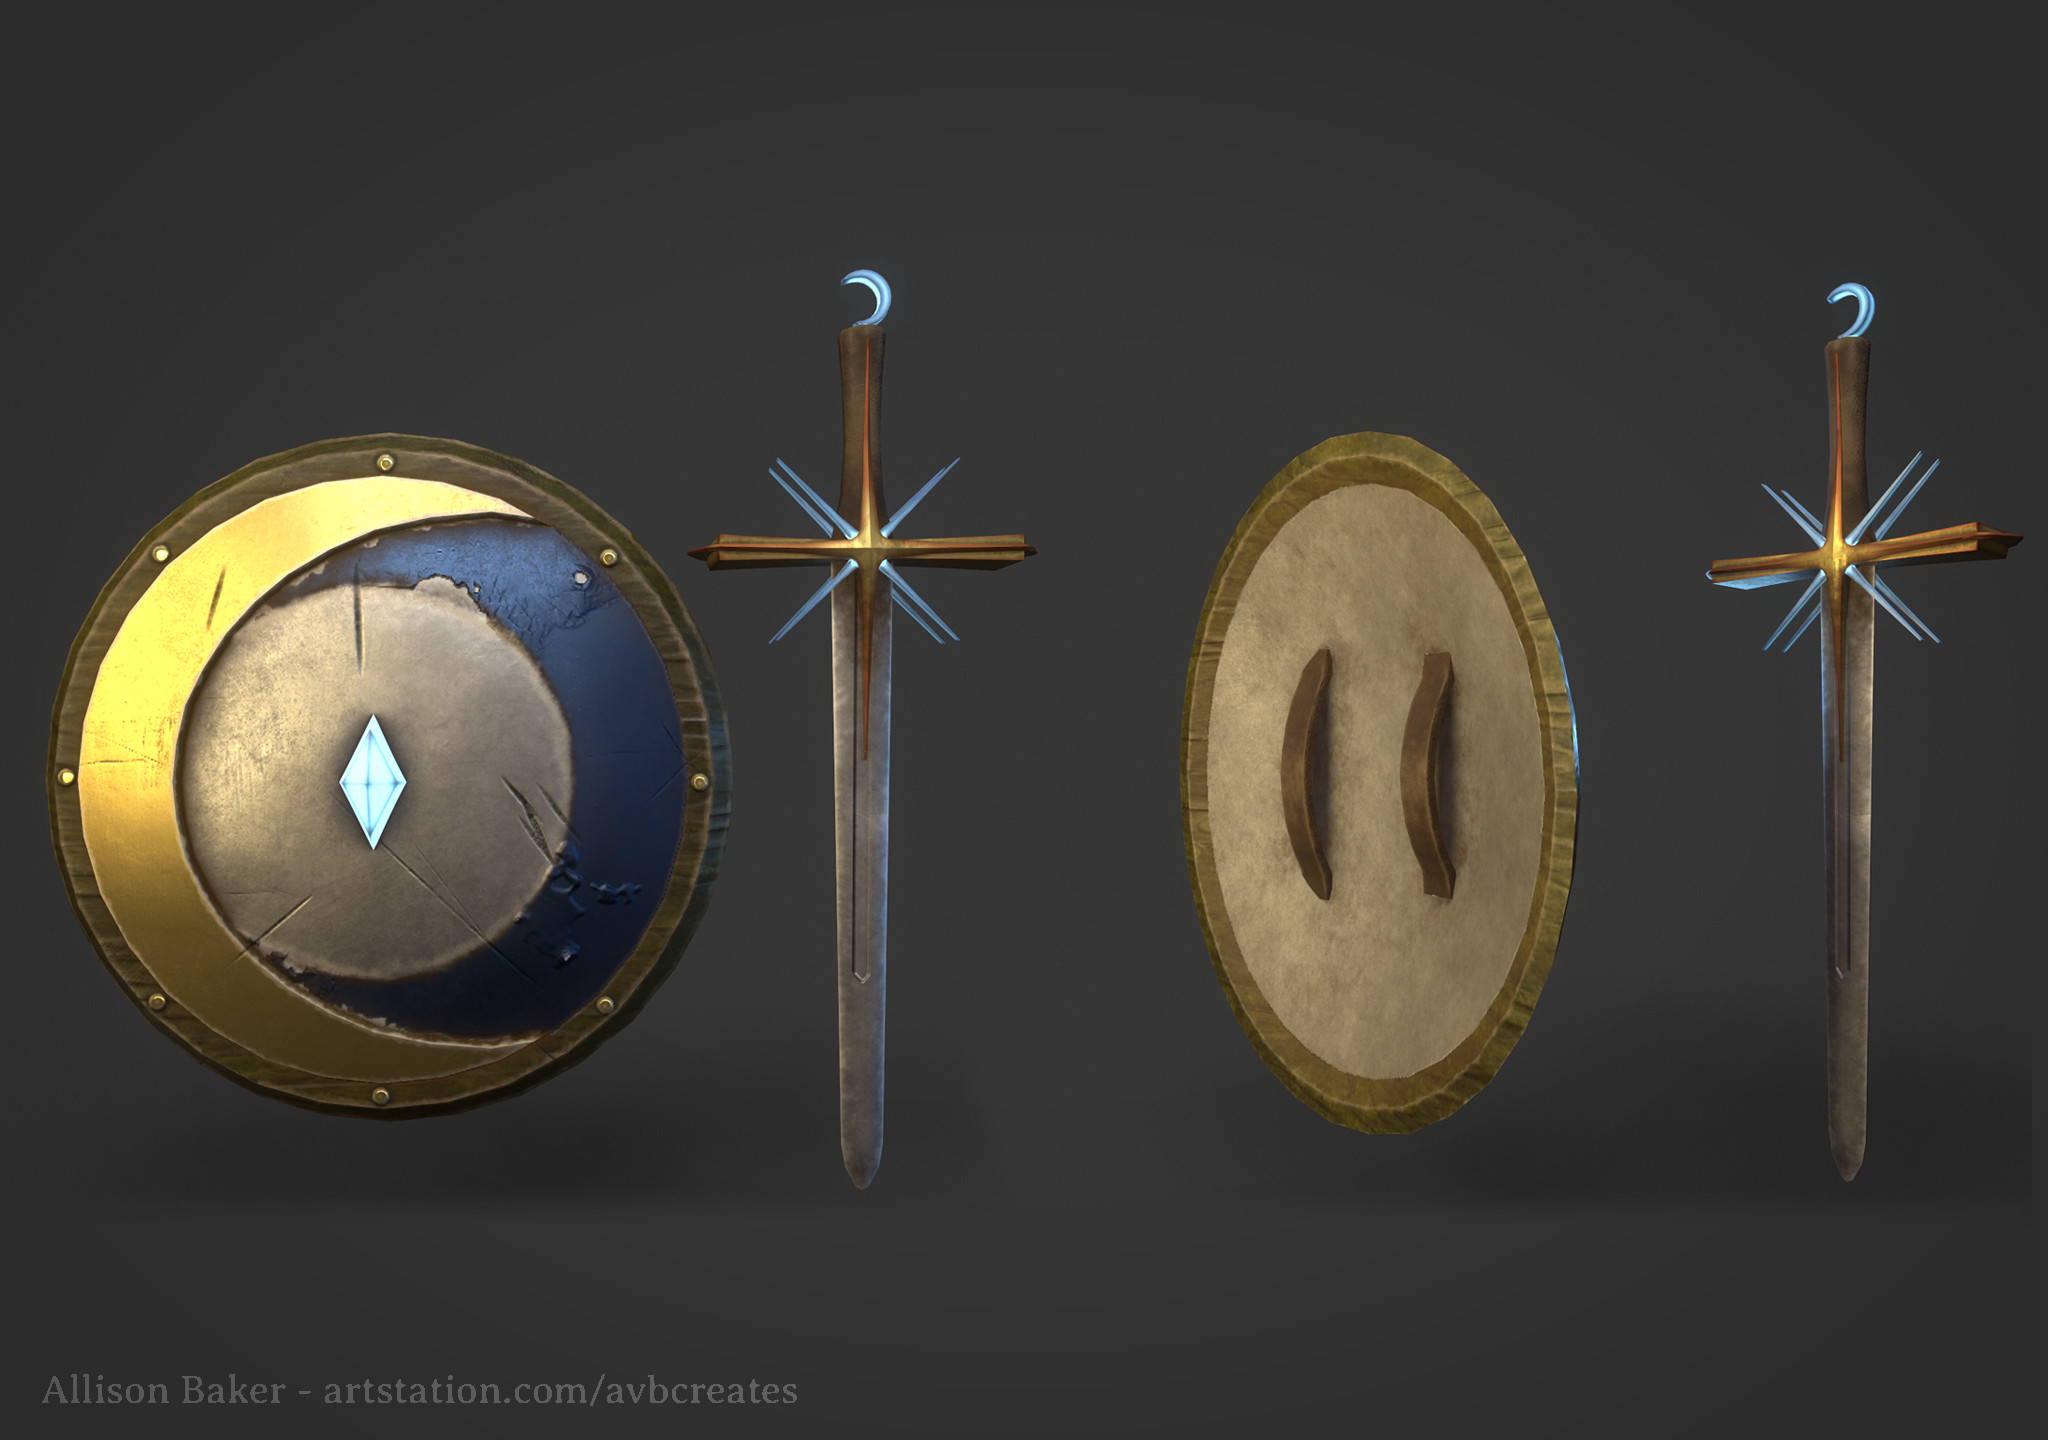 Sword and Shield details. Wood, leather, metal, and magical crystals prepare the user for battle.